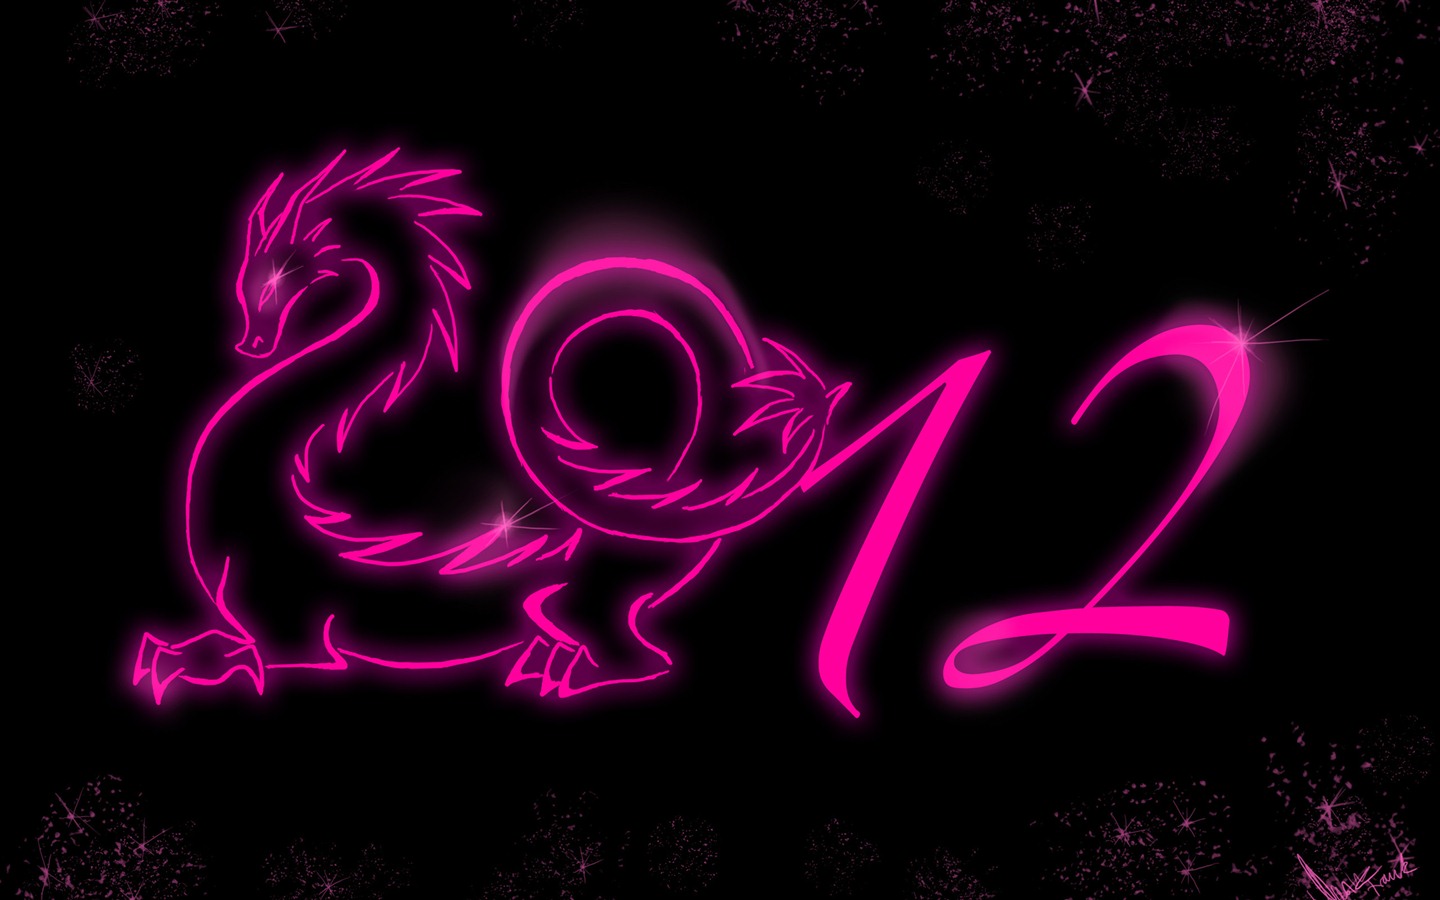 2012 New Year wallpapers (1) #16 - 1440x900